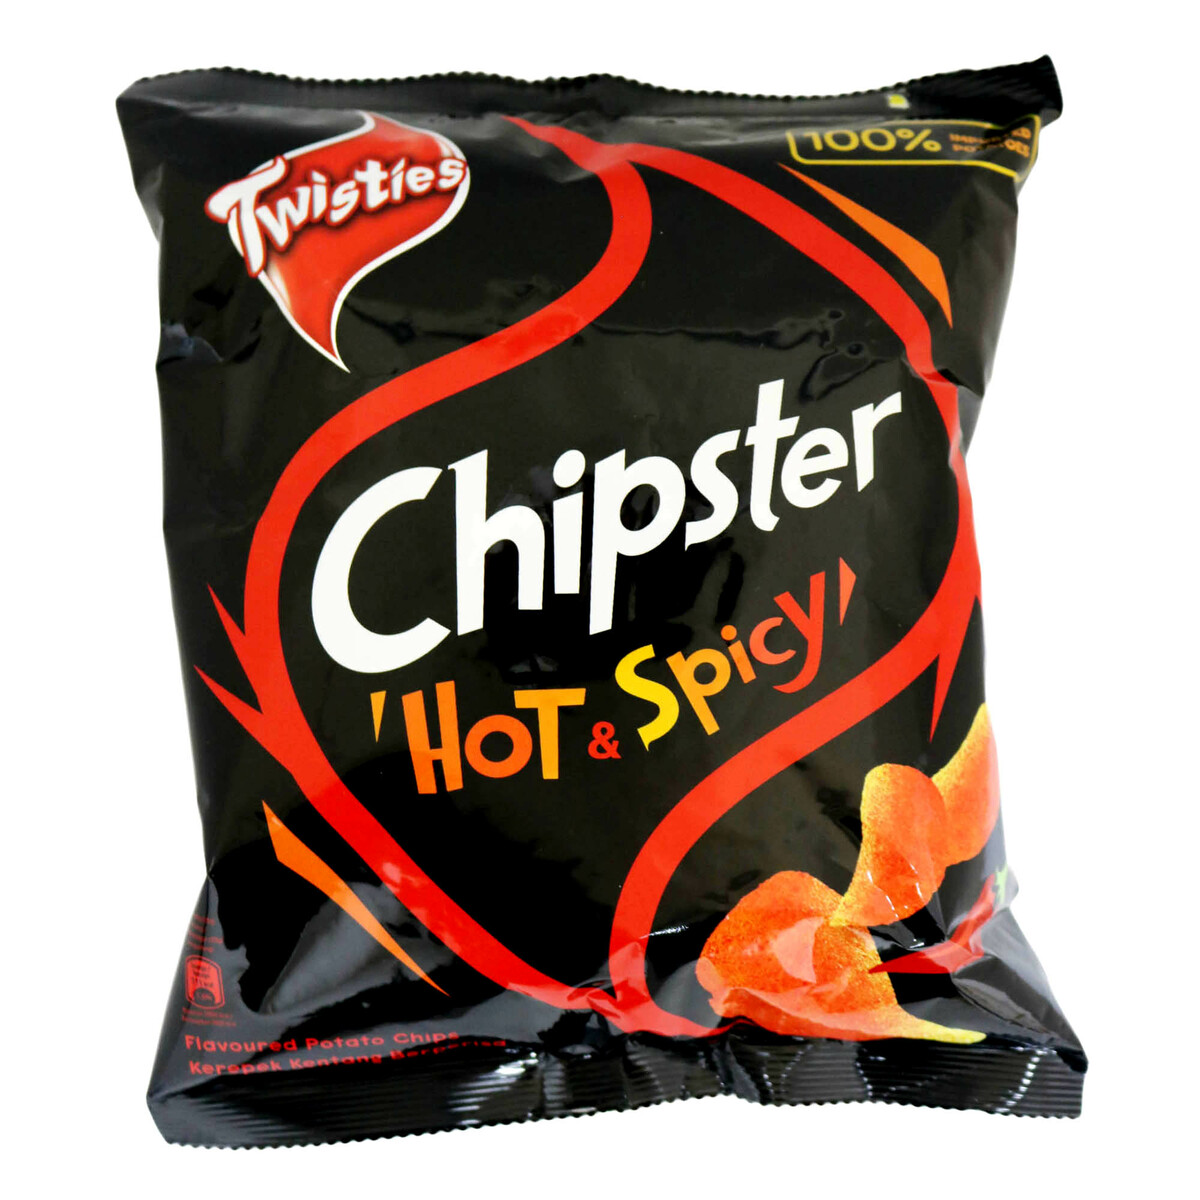 Twisties Chipster Hot & Spicy 60g Online at Best Price | Other Crisps ...